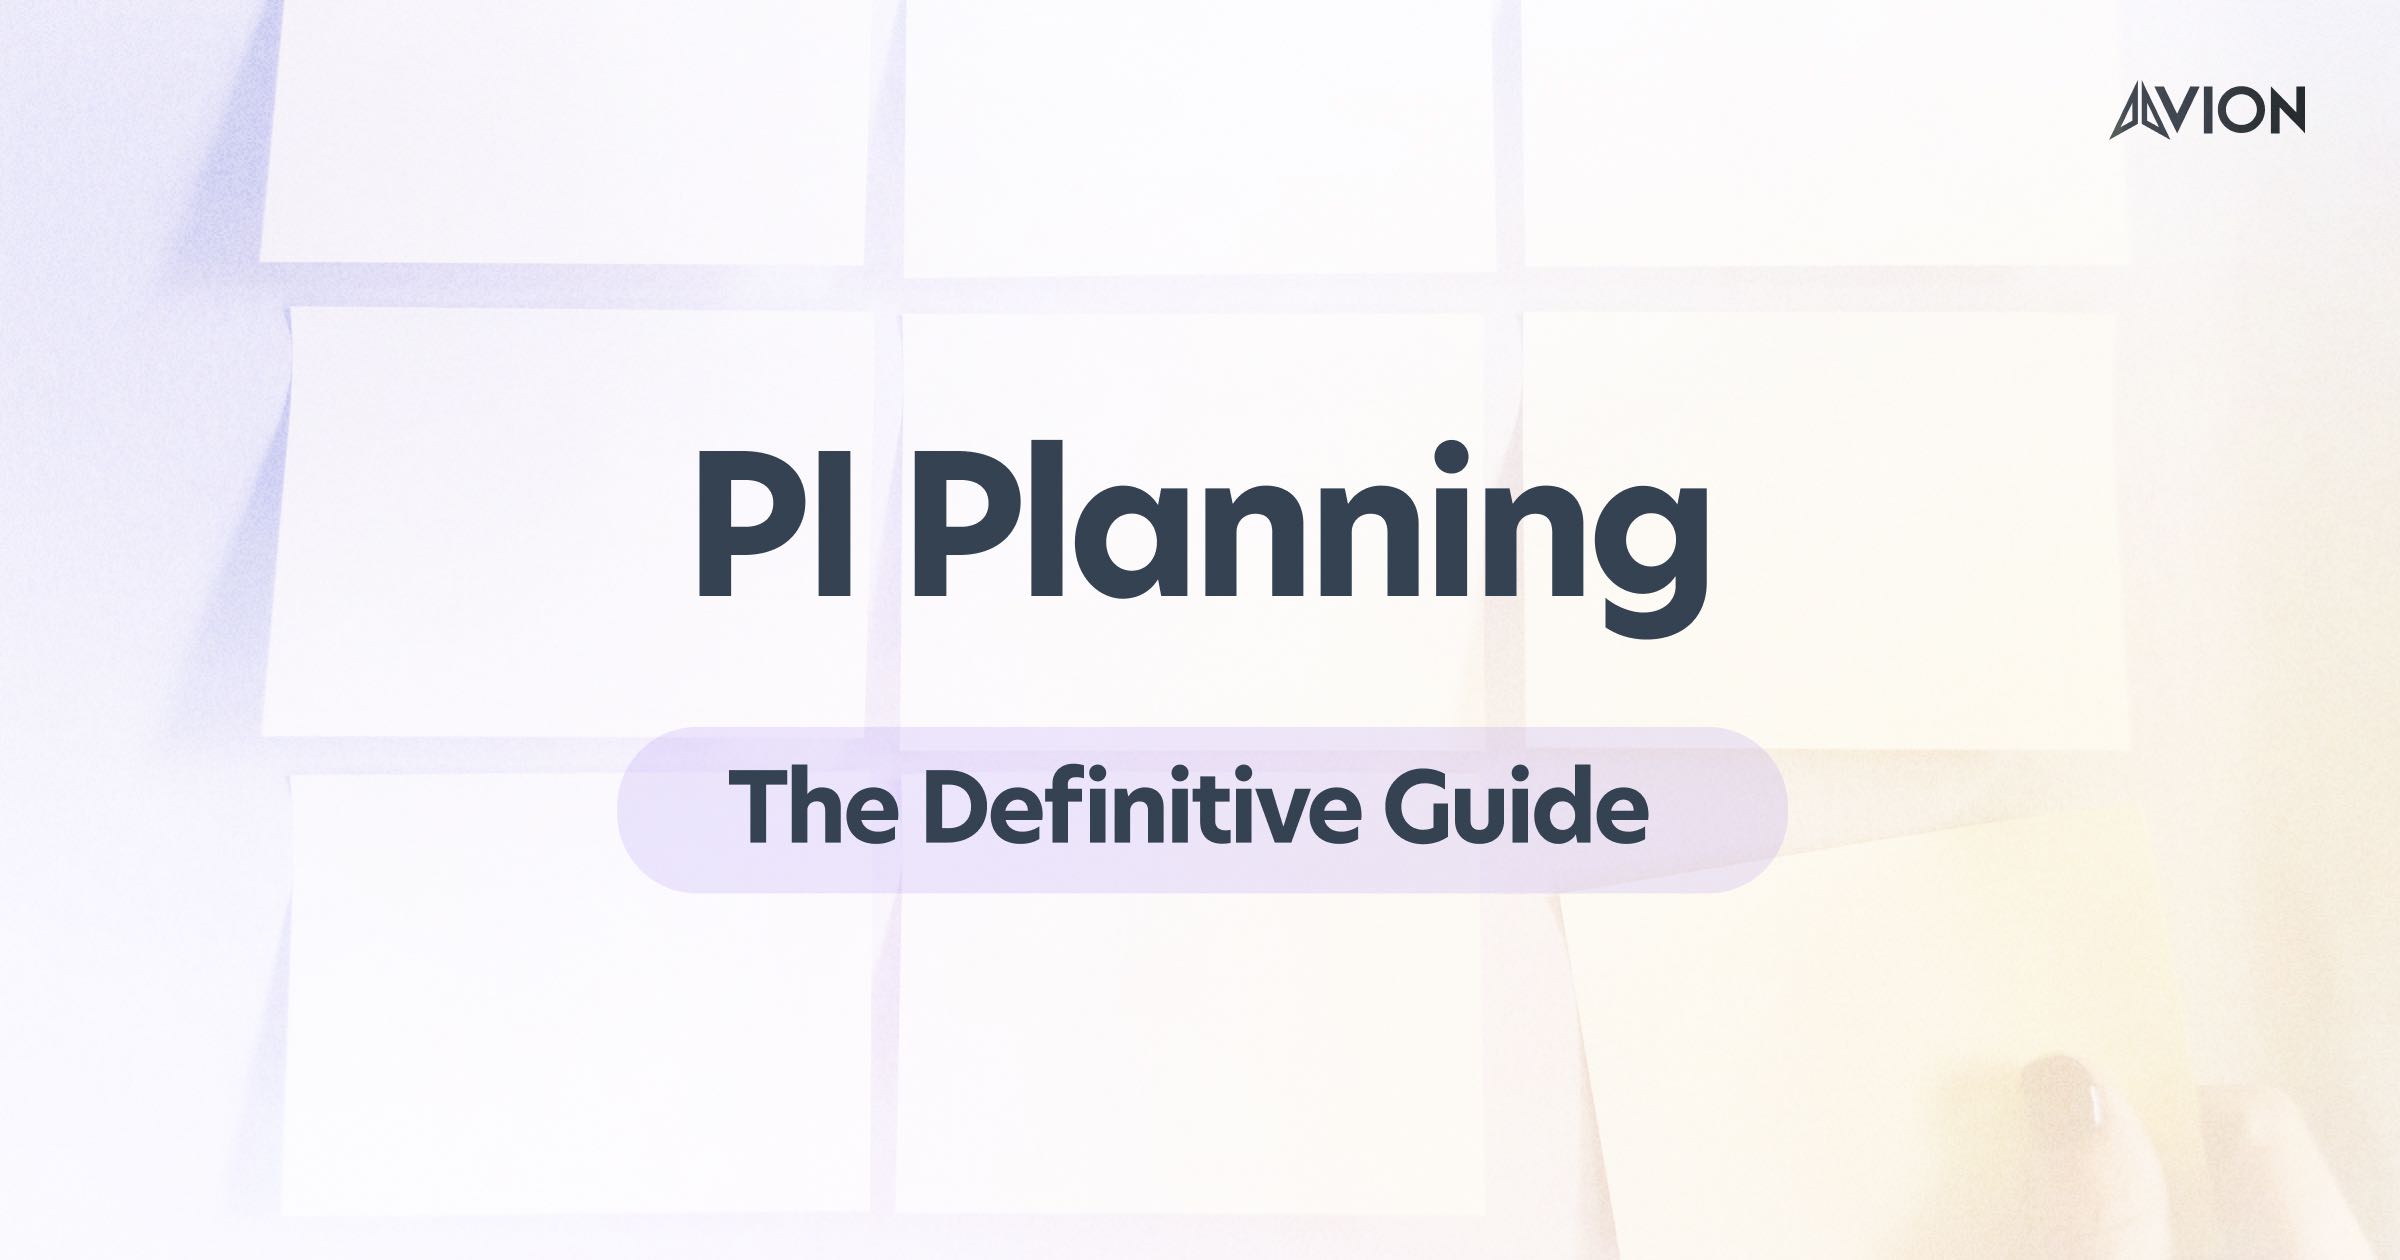 The Definitive Guide To PI Planning. Tips & Guidance